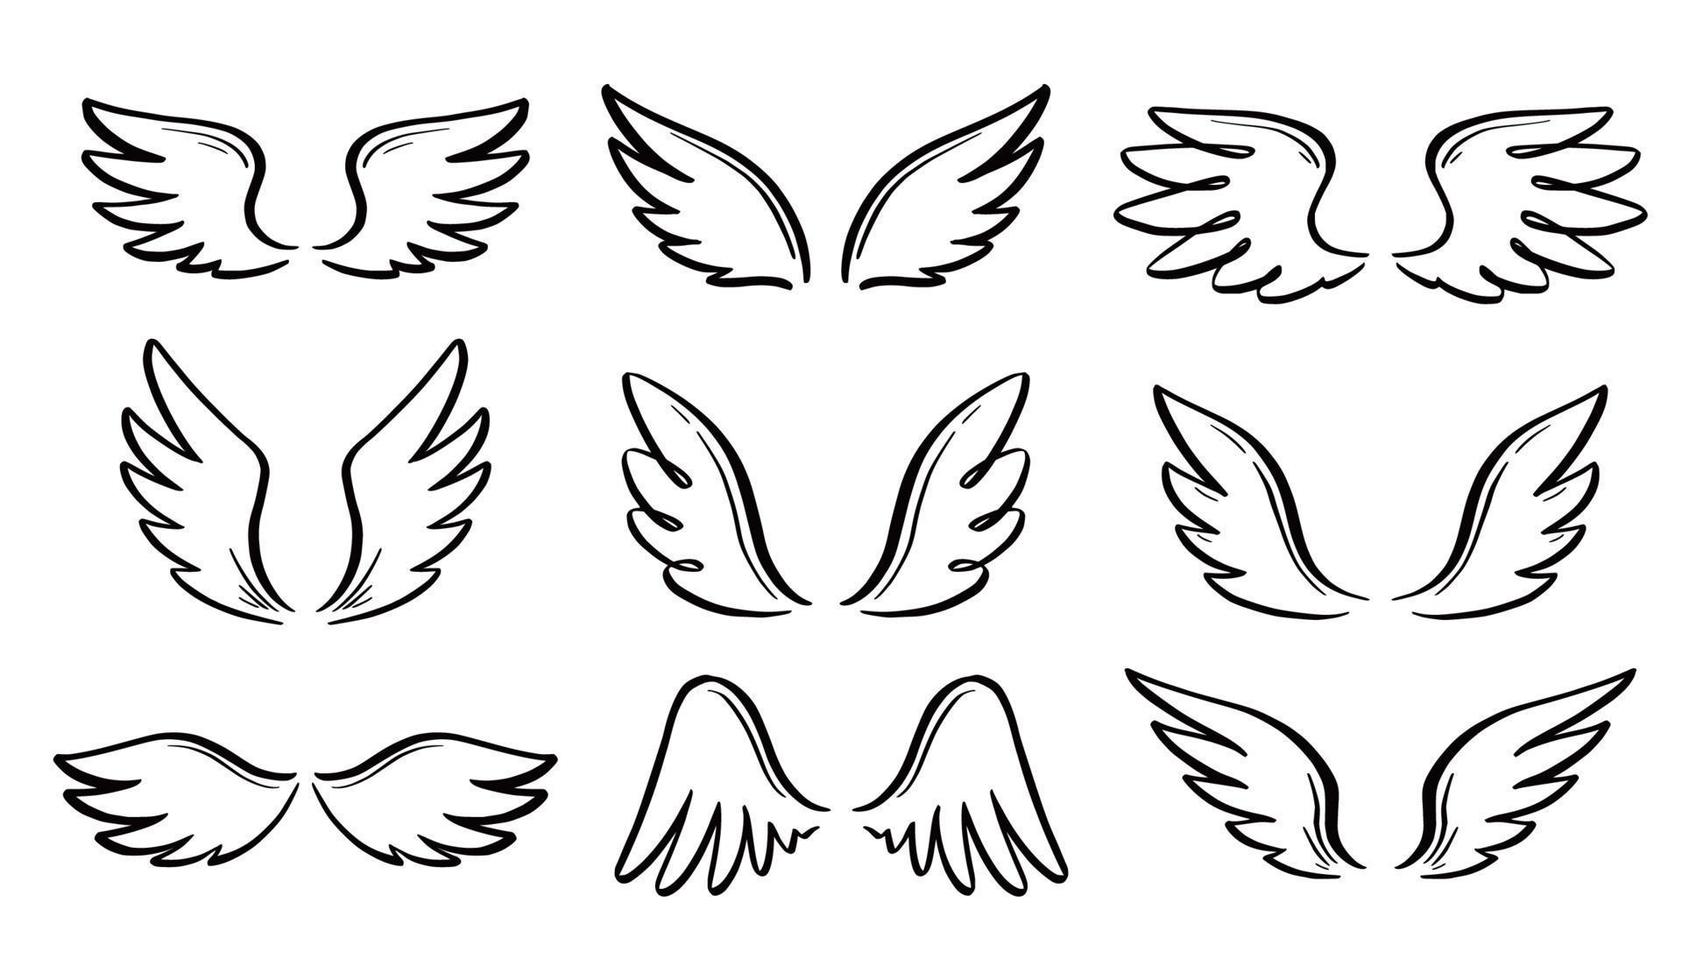 Angel doodle wing set. Hand drawn vector